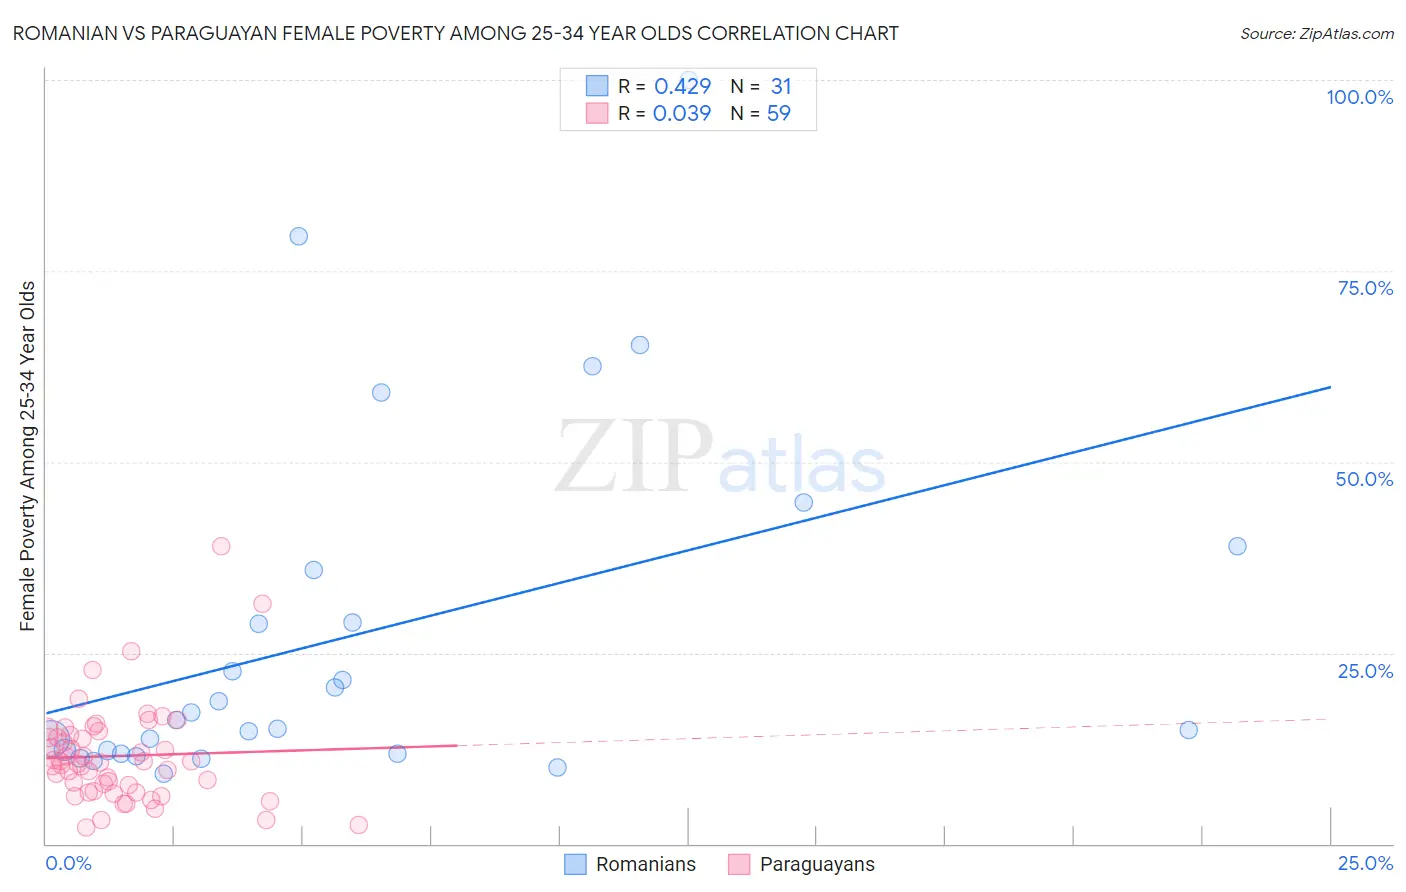 Romanian vs Paraguayan Female Poverty Among 25-34 Year Olds